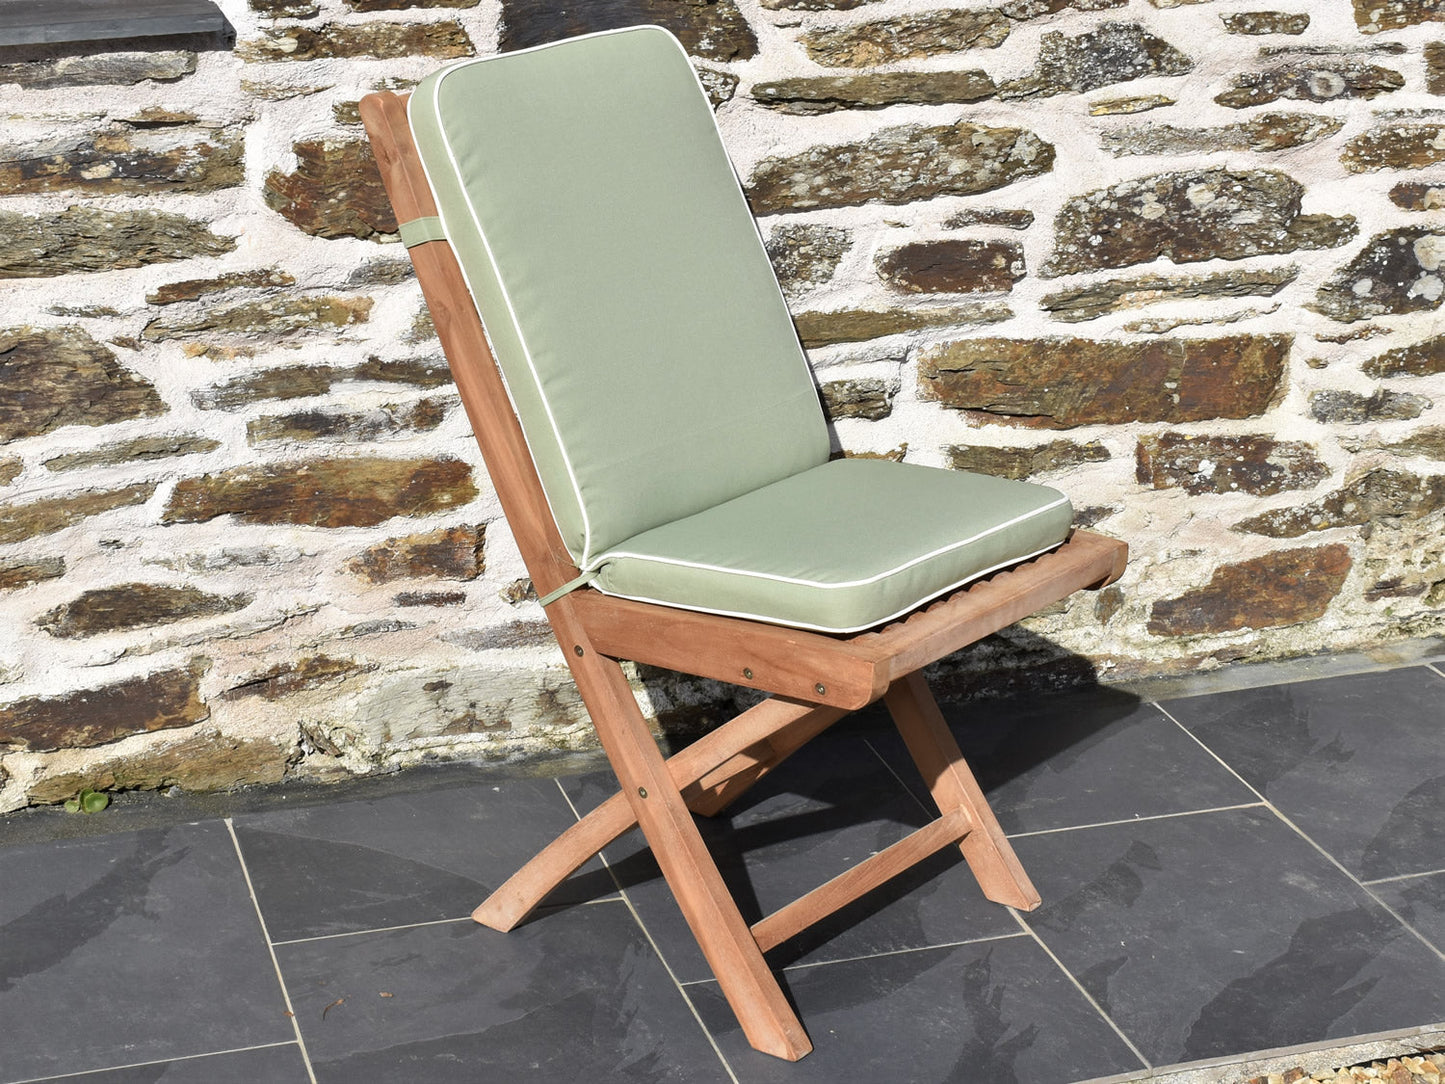 Luxury light olive green folding seat pad and back cushion, perfect for teak folding garden chairs